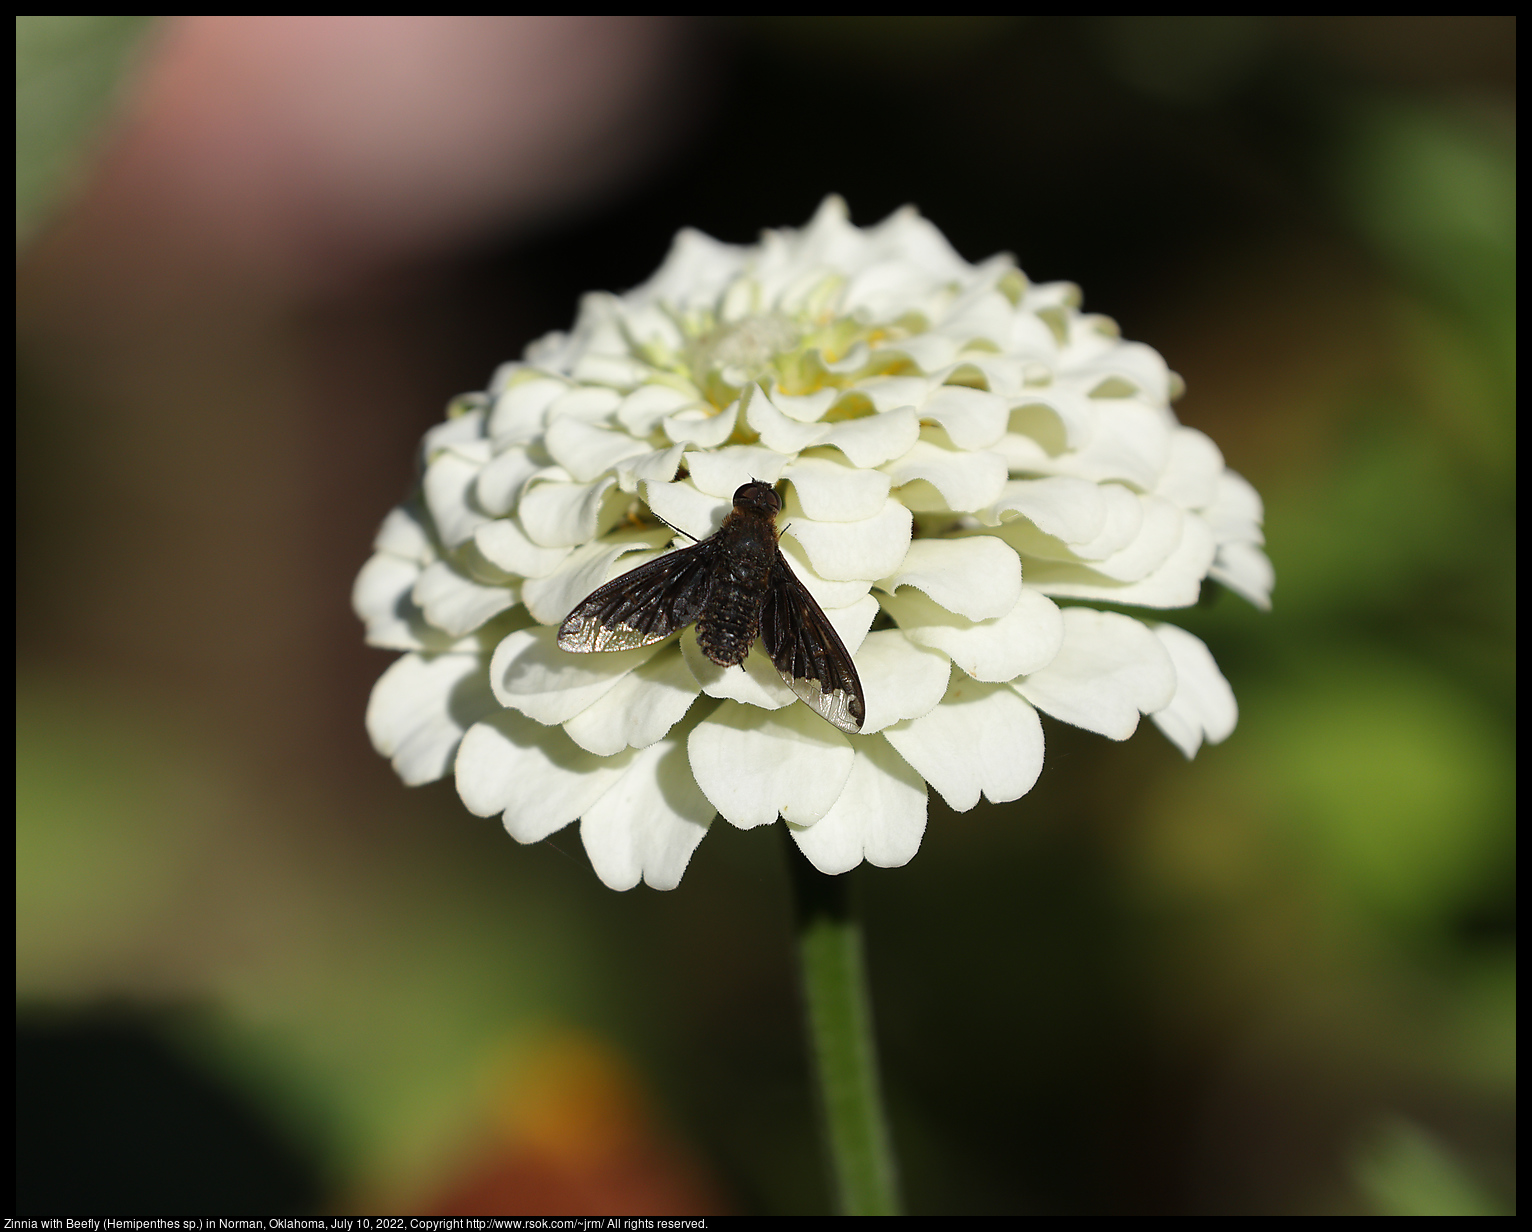 Zinnia with Bee fly (Hemipenthes sp.) in Norman, Oklahoma, July 10, 2022